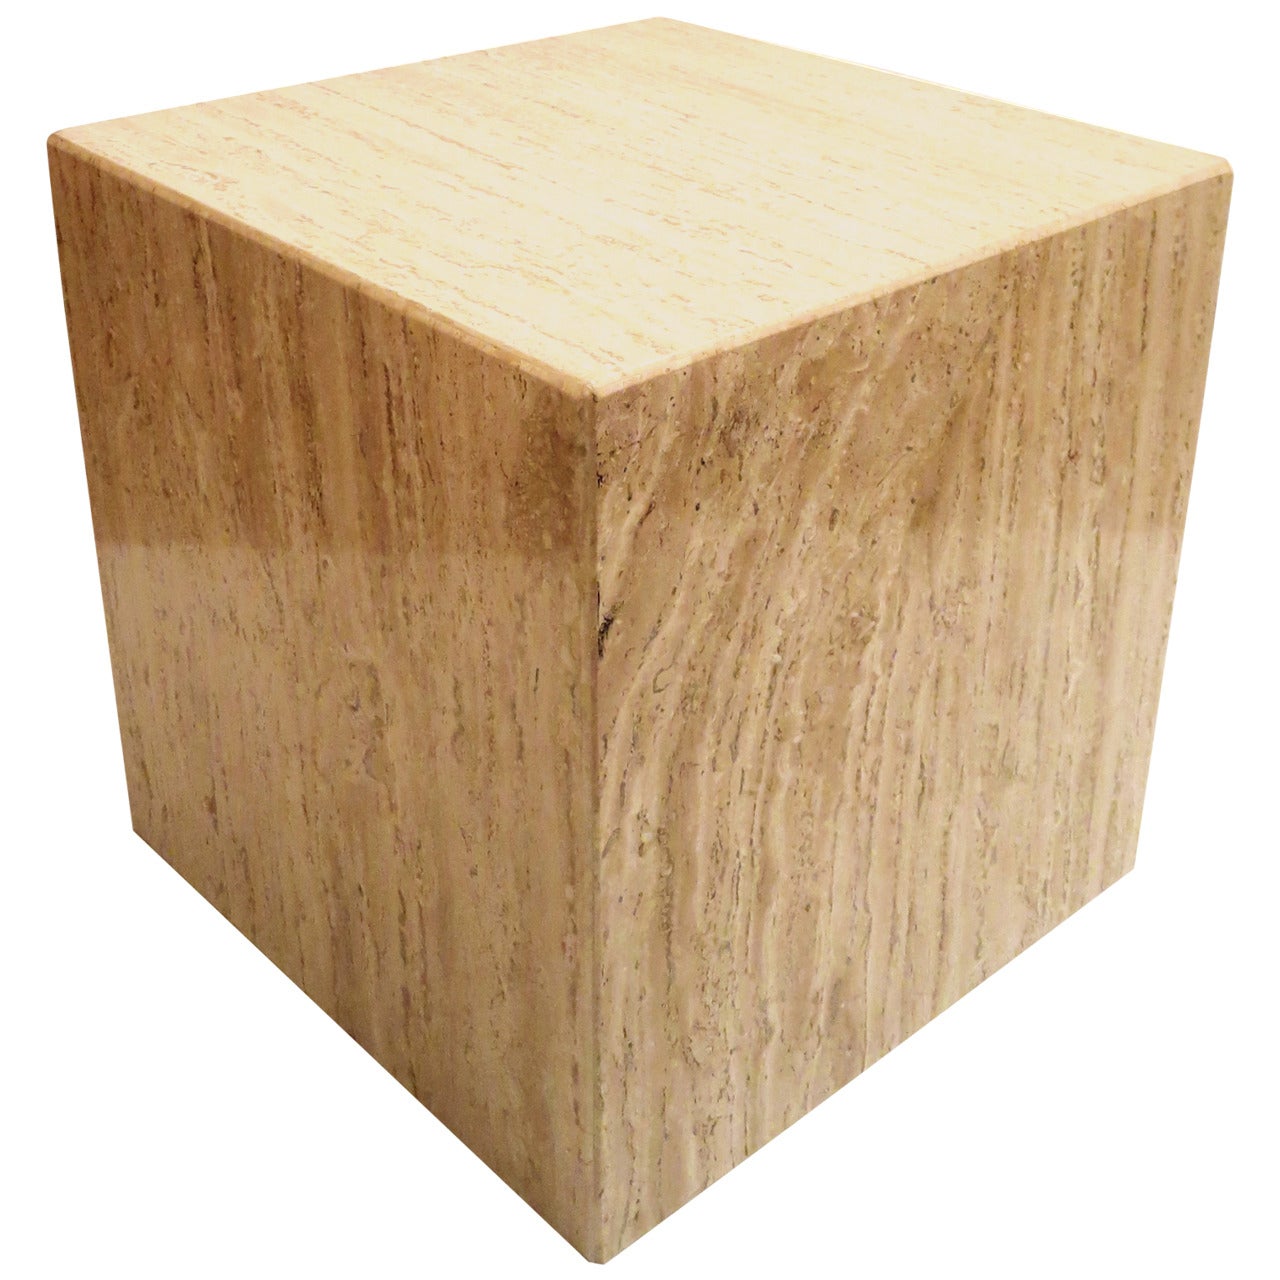 Square Cube Marble Base with Beveled Edge Corners Cocktail or End Table